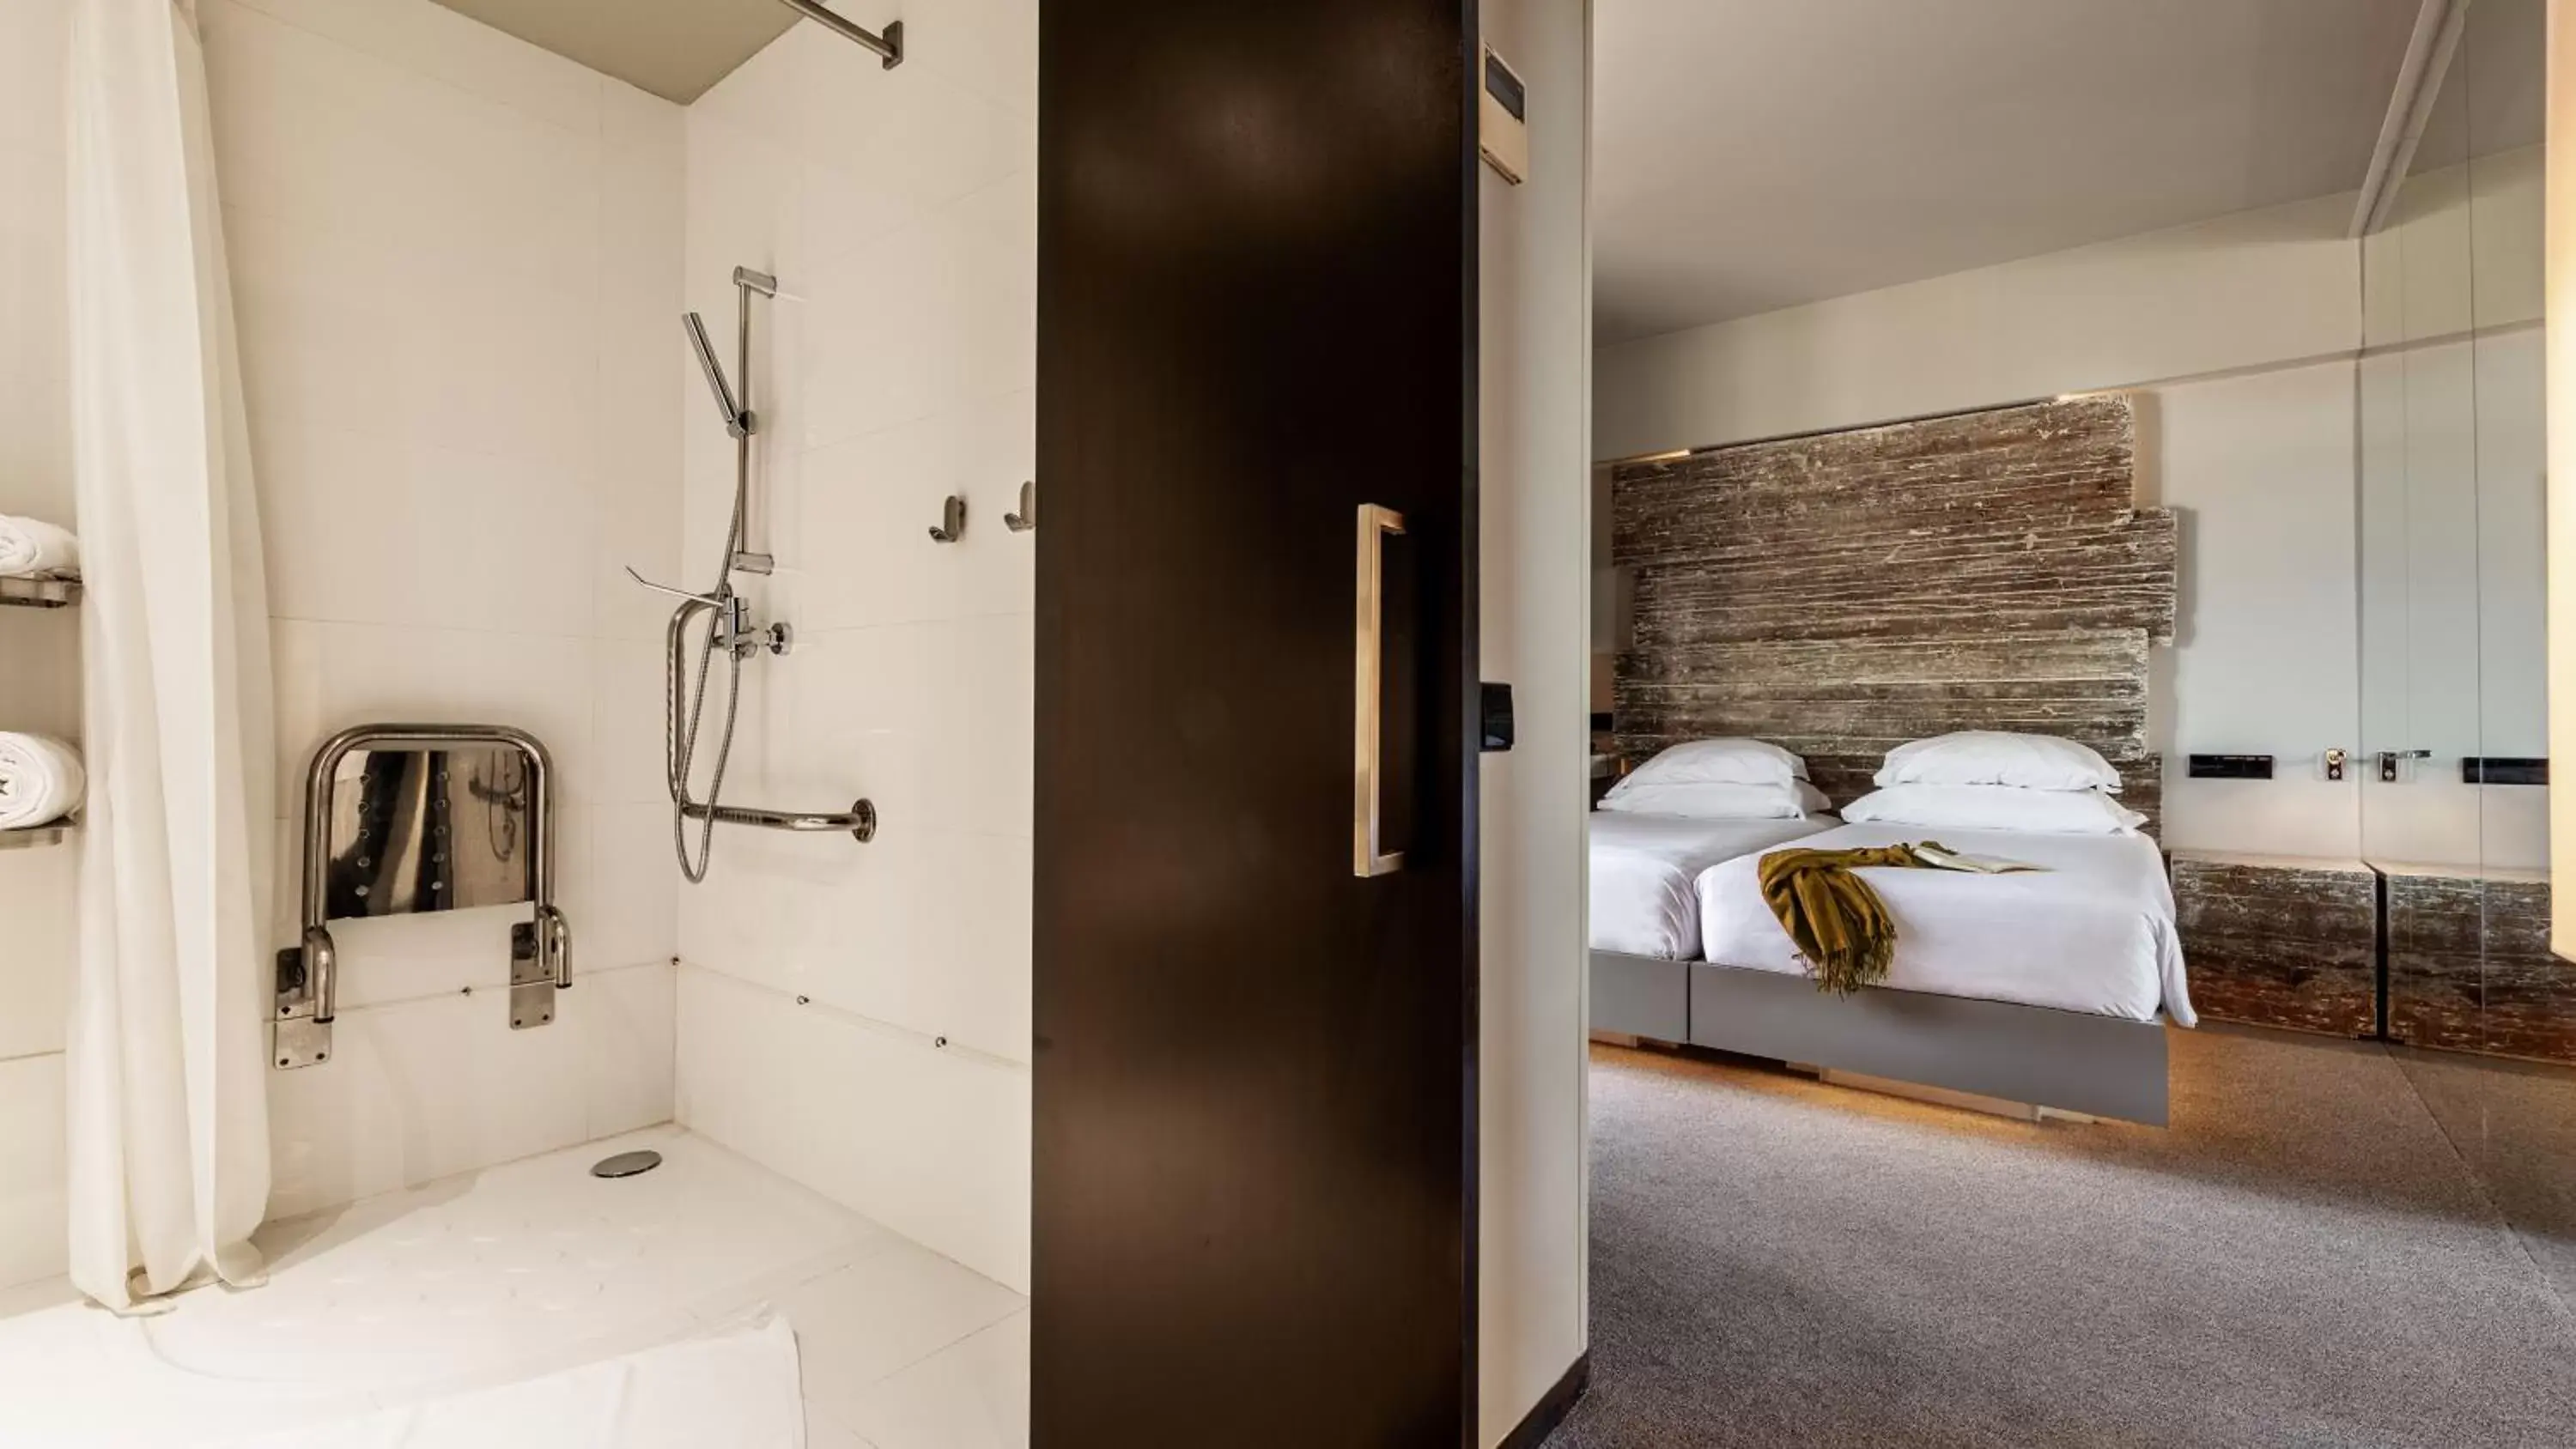 Facility for disabled guests, Bathroom in Vitoria Stone Hotel